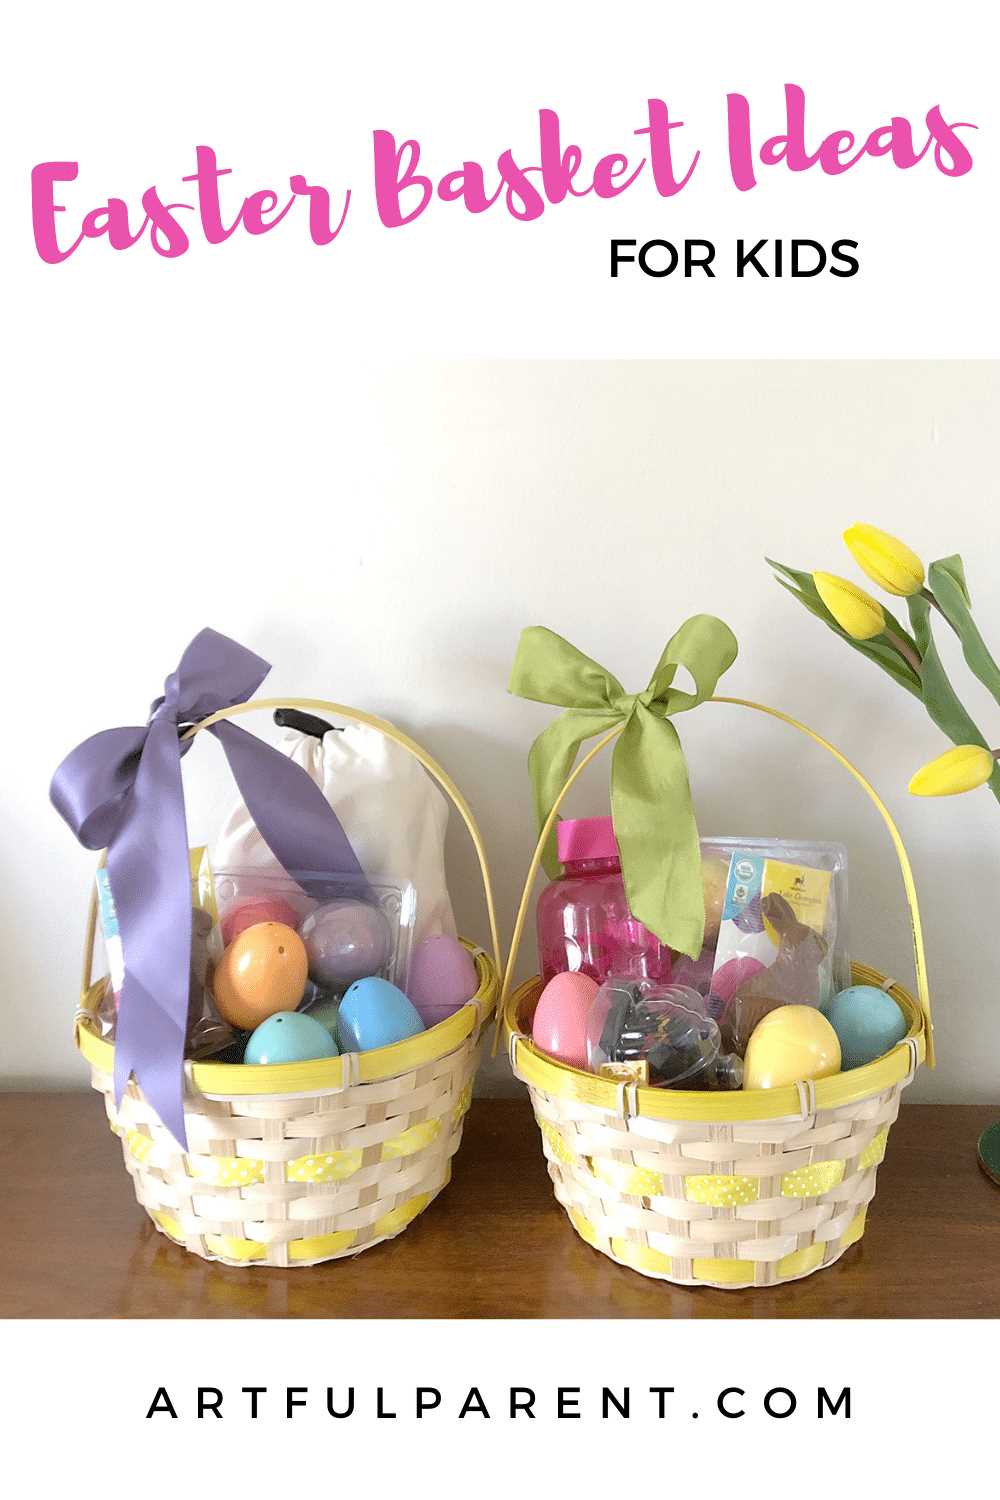 The Tradition of Easter Baskets